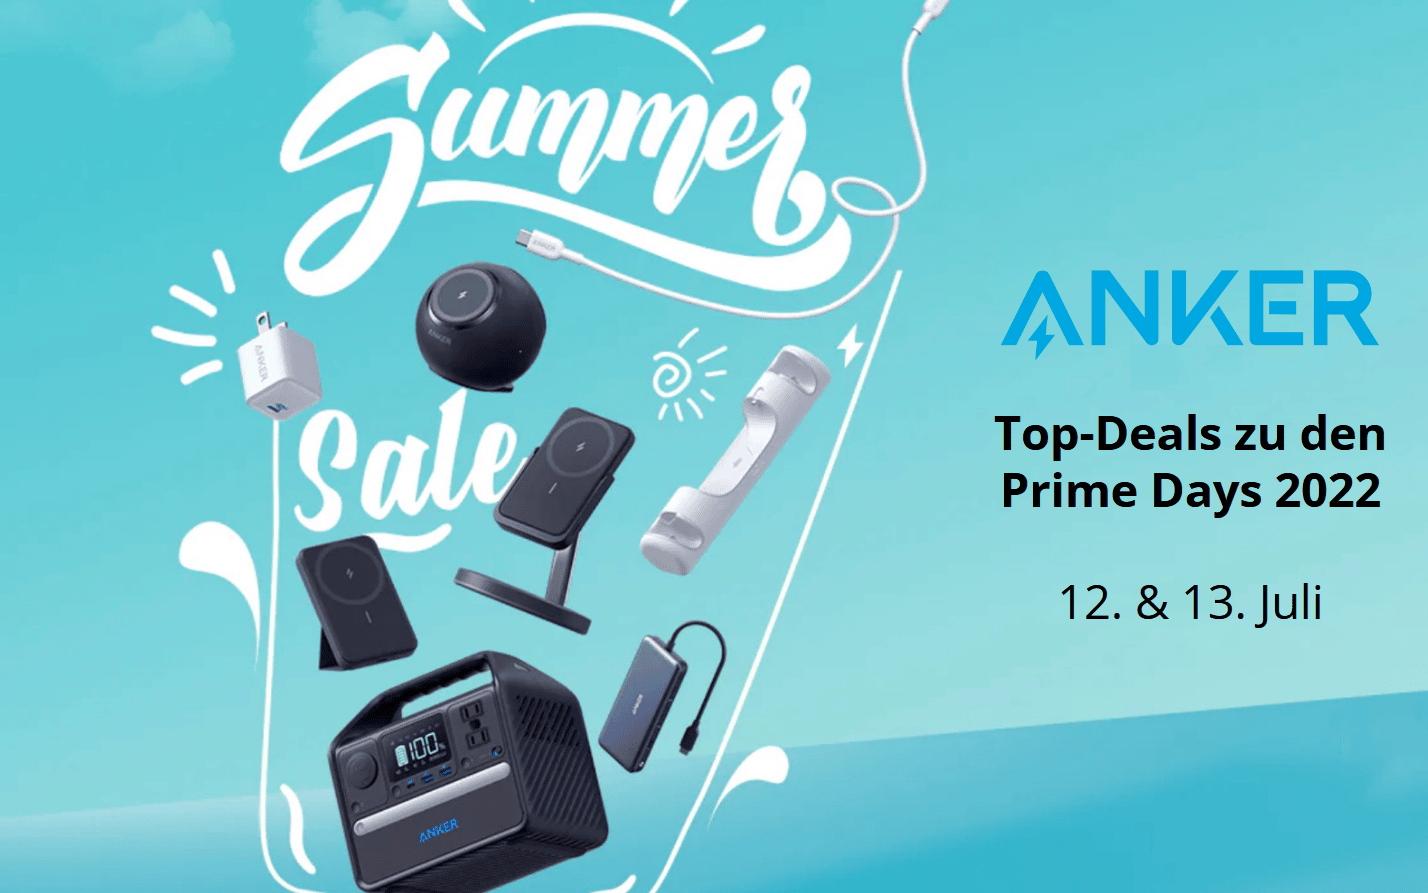 Anker Summer Sale Amazon Prime Day 2022